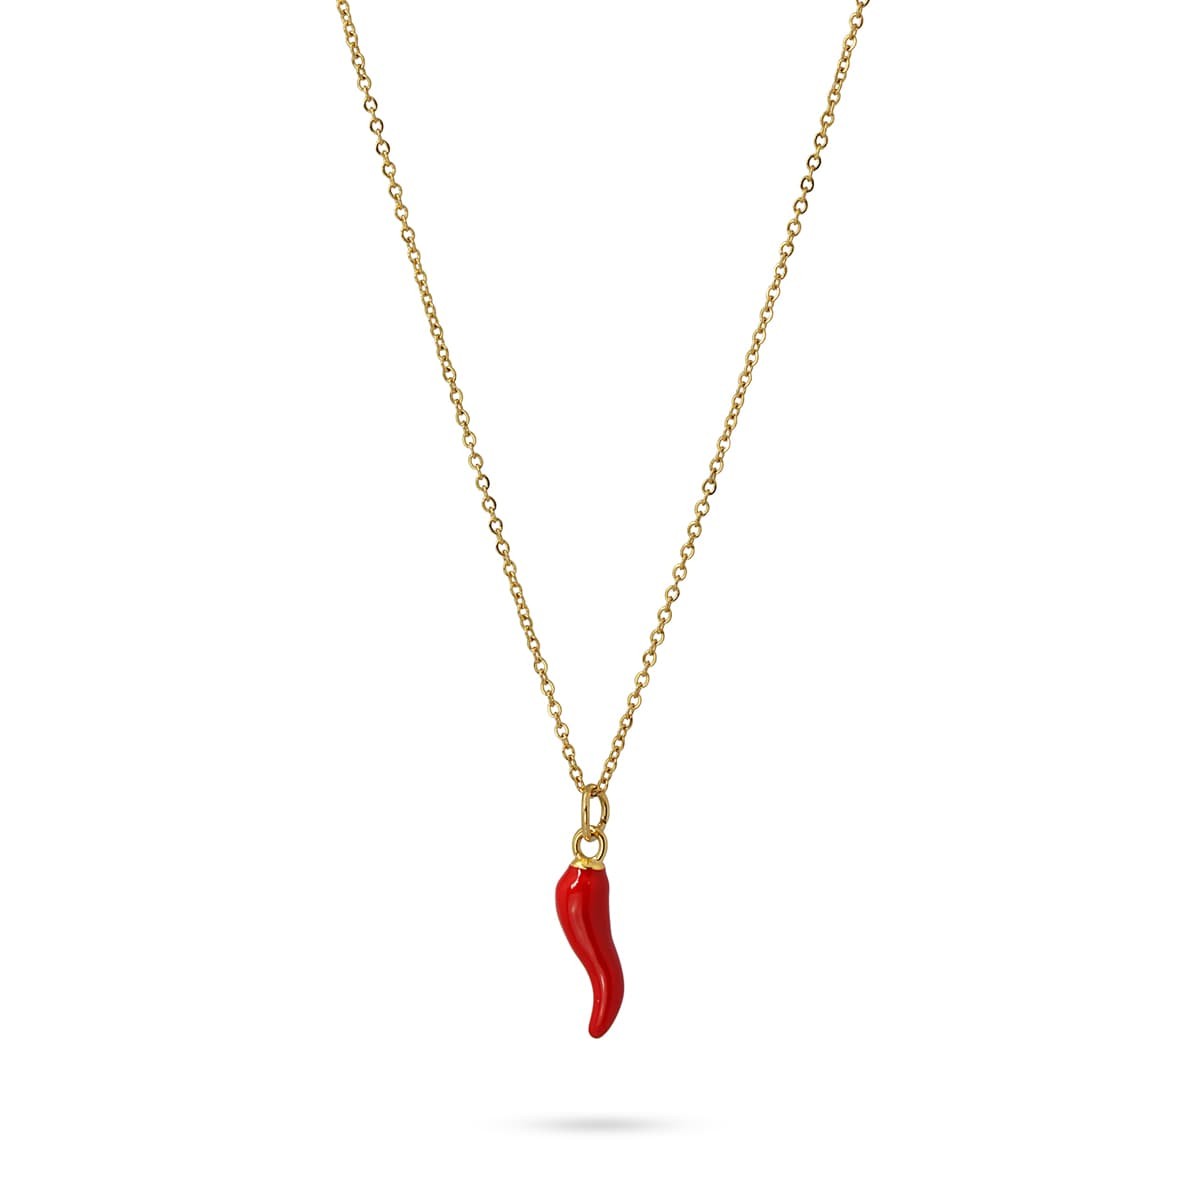 Chili Bco522 necklace